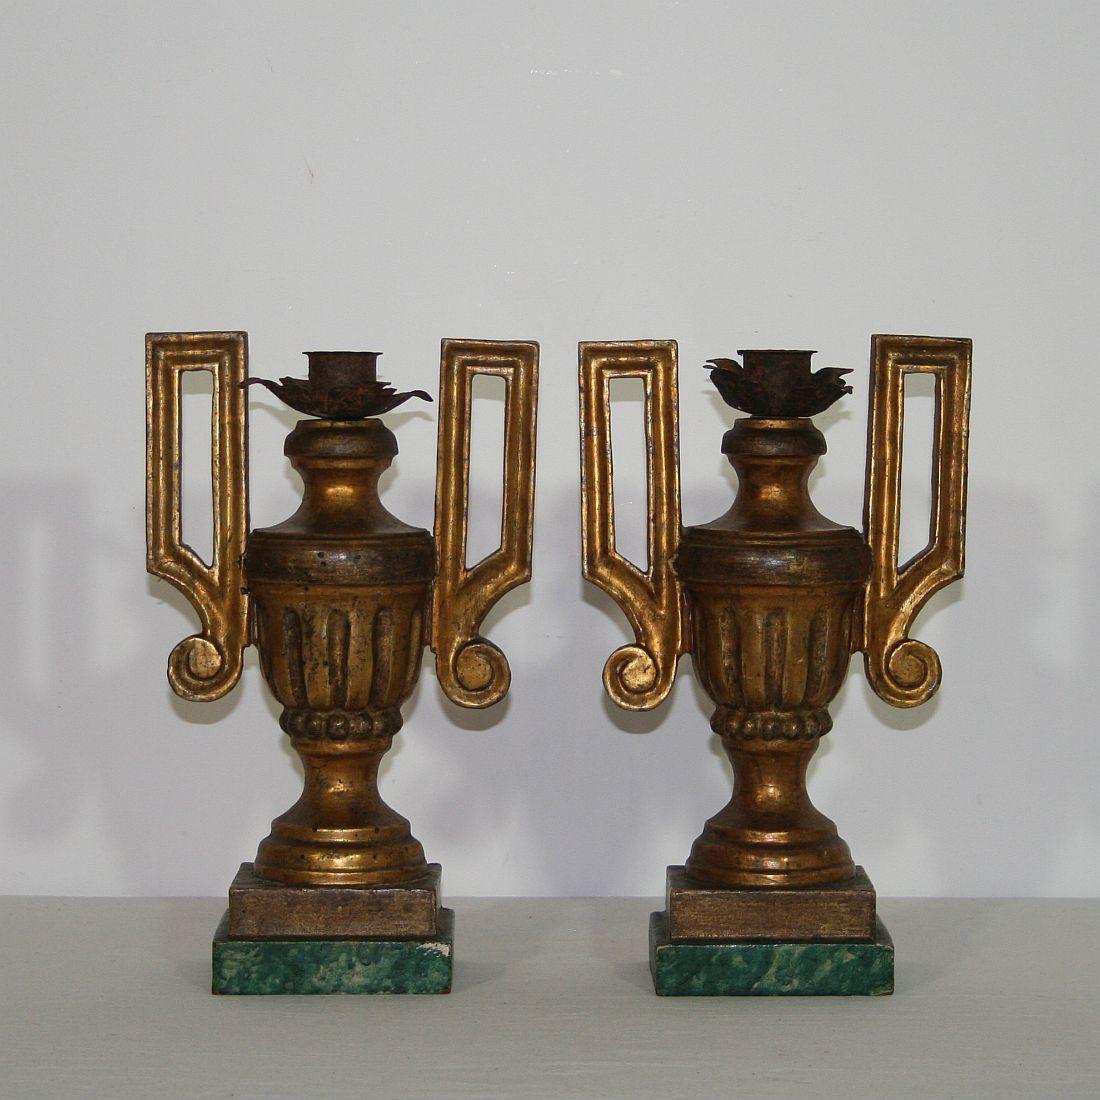 Fabulous pair of neoclassical candleholders
Italy, circa 1780
Weathered, old repairs.